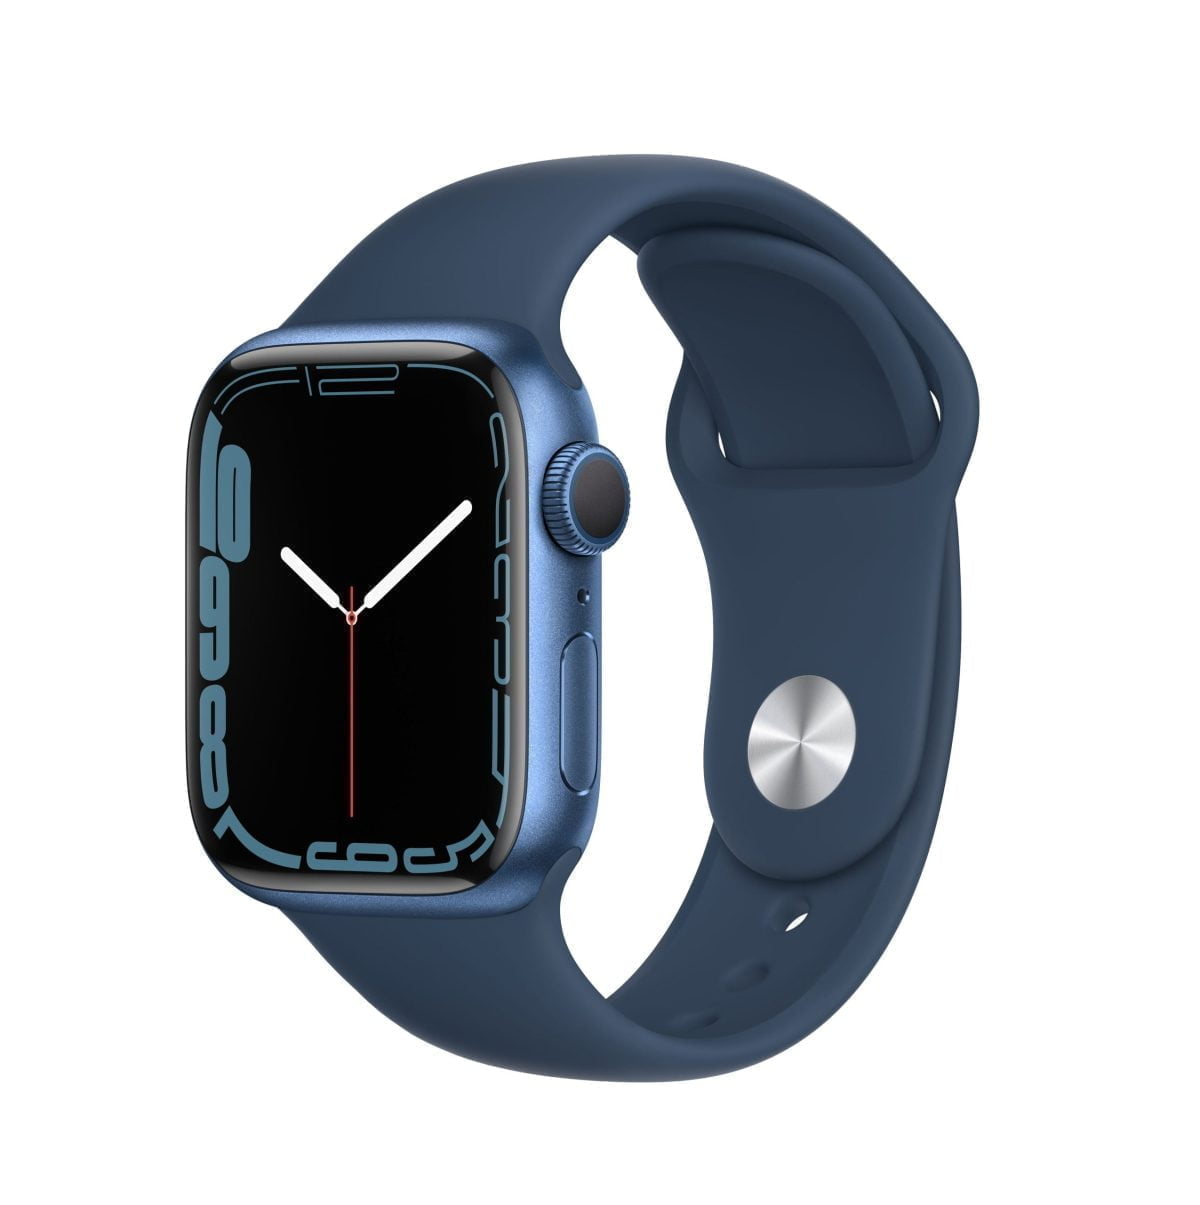 6215935 Sd 1 Scaled Apple &Amp;Lt;H1&Amp;Gt;Apple Watch Series 7 (Gps) 41Mm Blue Aluminum Case With Abyss Blue Sport Band - Blue&Amp;Lt;/H1&Amp;Gt; &Amp;Lt;Div Class=&Amp;Quot;Long-Description-Container Body-Copy &Amp;Quot;&Amp;Gt; &Amp;Lt;Div Class=&Amp;Quot;Html-Fragment&Amp;Quot;&Amp;Gt; &Amp;Lt;Div&Amp;Gt; &Amp;Lt;Div&Amp;Gt; &Amp;Lt;H2&Amp;Gt;Model : Mkn13&Amp;Lt;/H2&Amp;Gt; &Amp;Lt;/Div&Amp;Gt; &Amp;Lt;Div&Amp;Gt;The Largest, Most Advanced Always-On Retina Display Yet Makes Everything You Do With Your Apple Watch Series 7 Bigger And Better. Series 7 Is The Most Durable Apple Watch Ever Built, With An Even More Crack-Resistant Front Crystal. Advanced Features Let You Measure Your Blood Oxygen Level,¹ Take An Ecg Anytime,² And Access Mindfulness And Sleep Tracking Apps. You Can Also Track Dozens Of Workouts, Including New Tai Chi And Pilates.&Amp;Lt;/Div&Amp;Gt; &Amp;Lt;/Div&Amp;Gt; &Amp;Lt;/Div&Amp;Gt; &Amp;Lt;/Div&Amp;Gt; Apple Watch Series Apple Watch Series 7 (Gps) 41Mm Blue Aluminum Case With Abyss Blue Sport Band - Blue